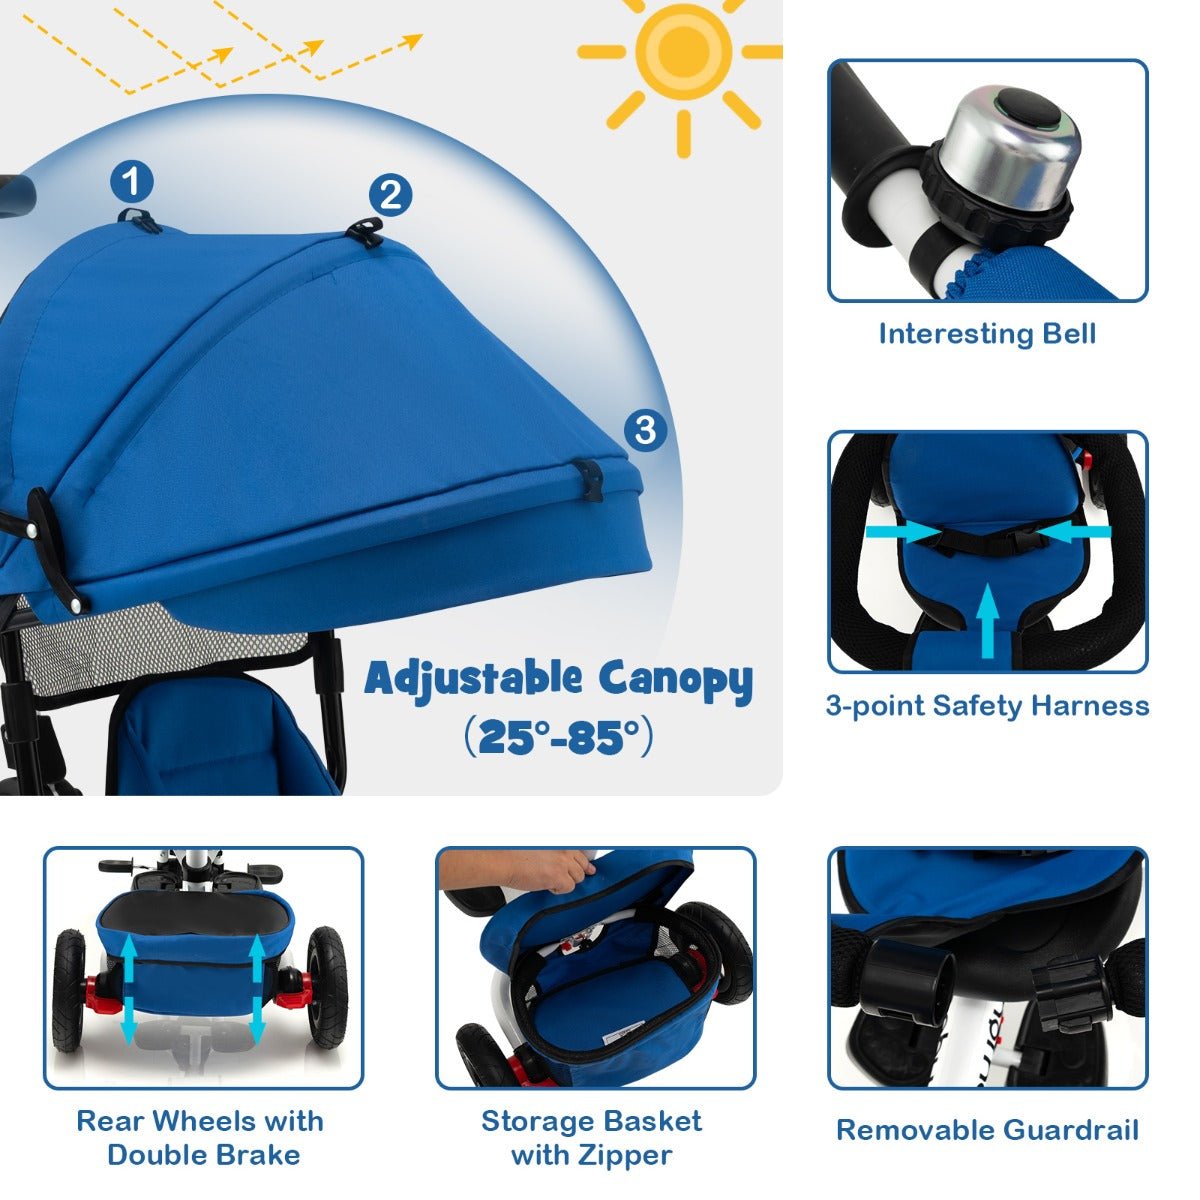 Enhance Stroller Experience with the Blue Tricycle - Buy Now!